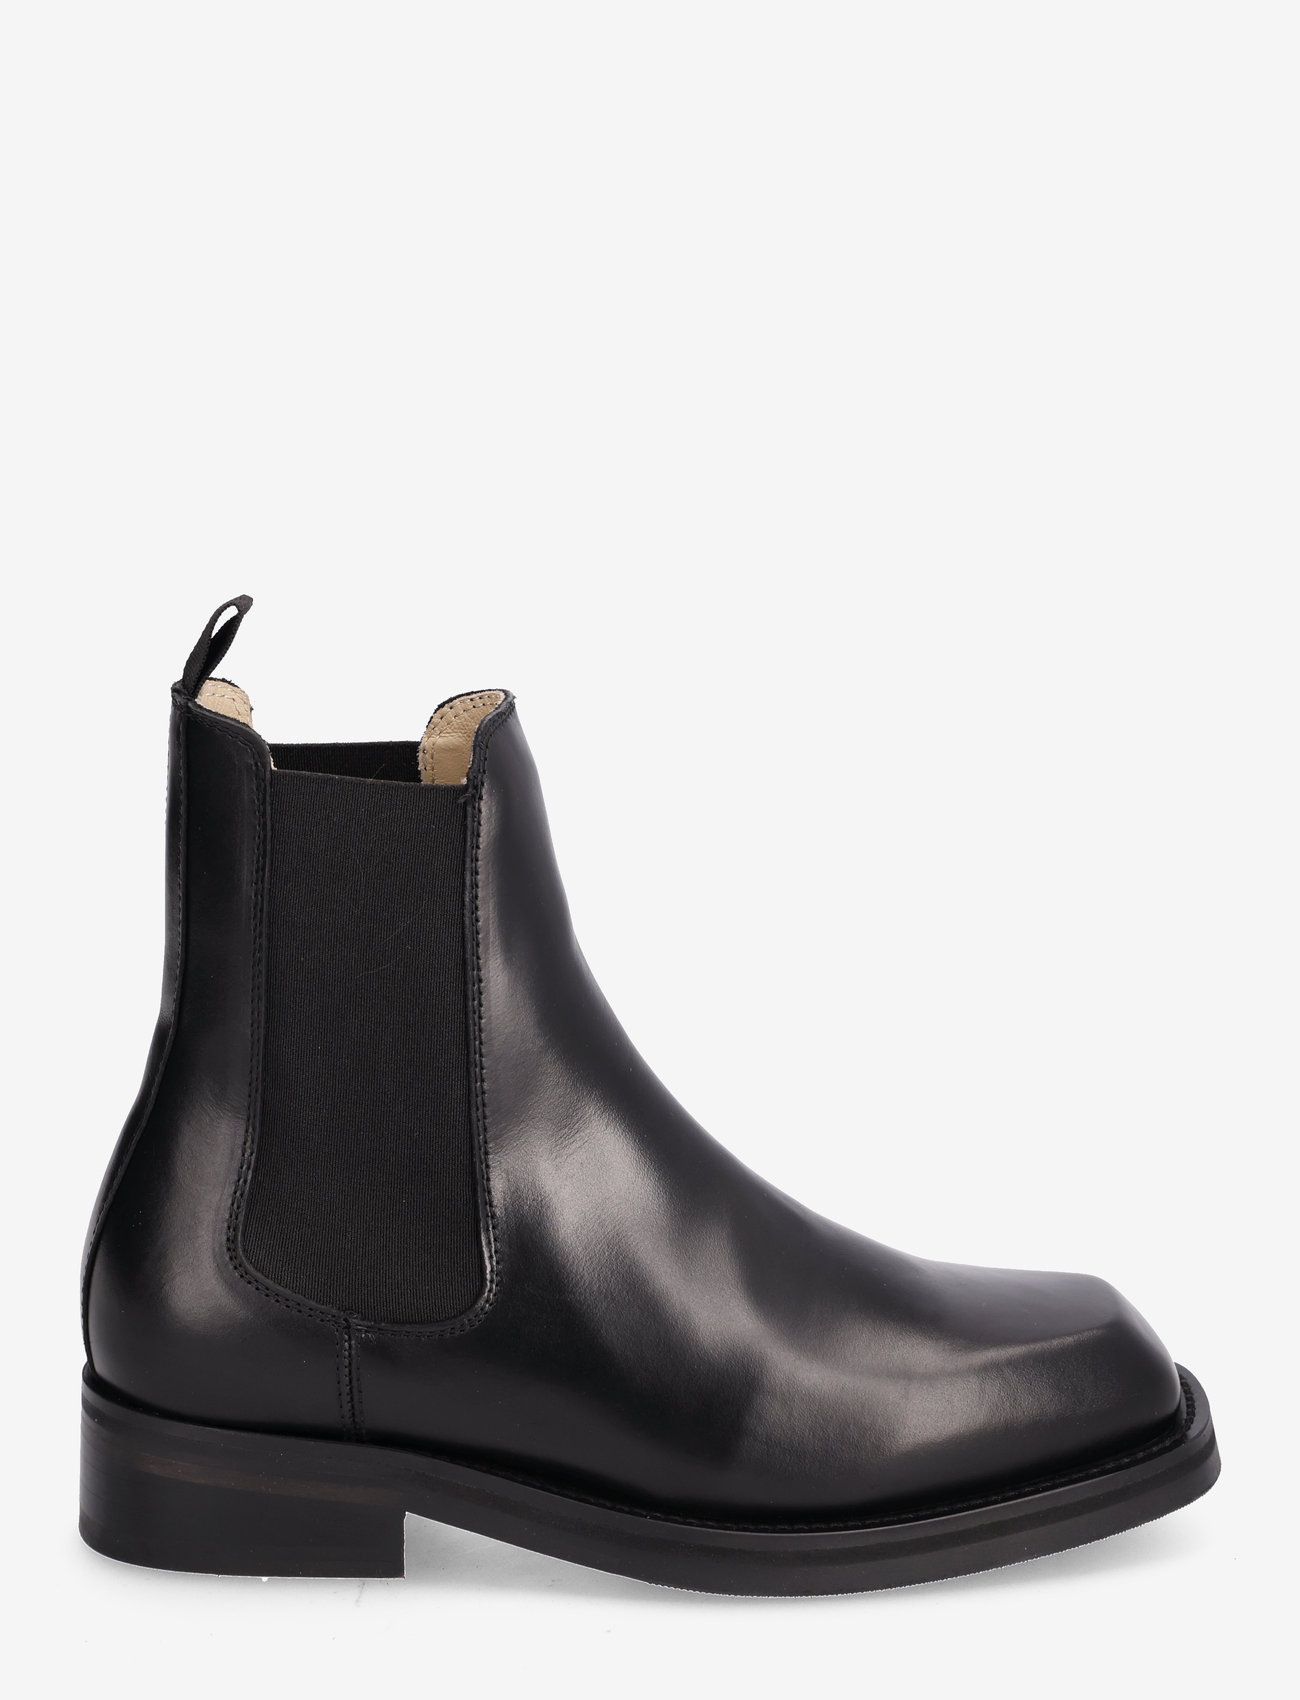 Selected Femme - SLFSAGA LEATHER CHELSEA BOOT - chelsea boots - black - 1